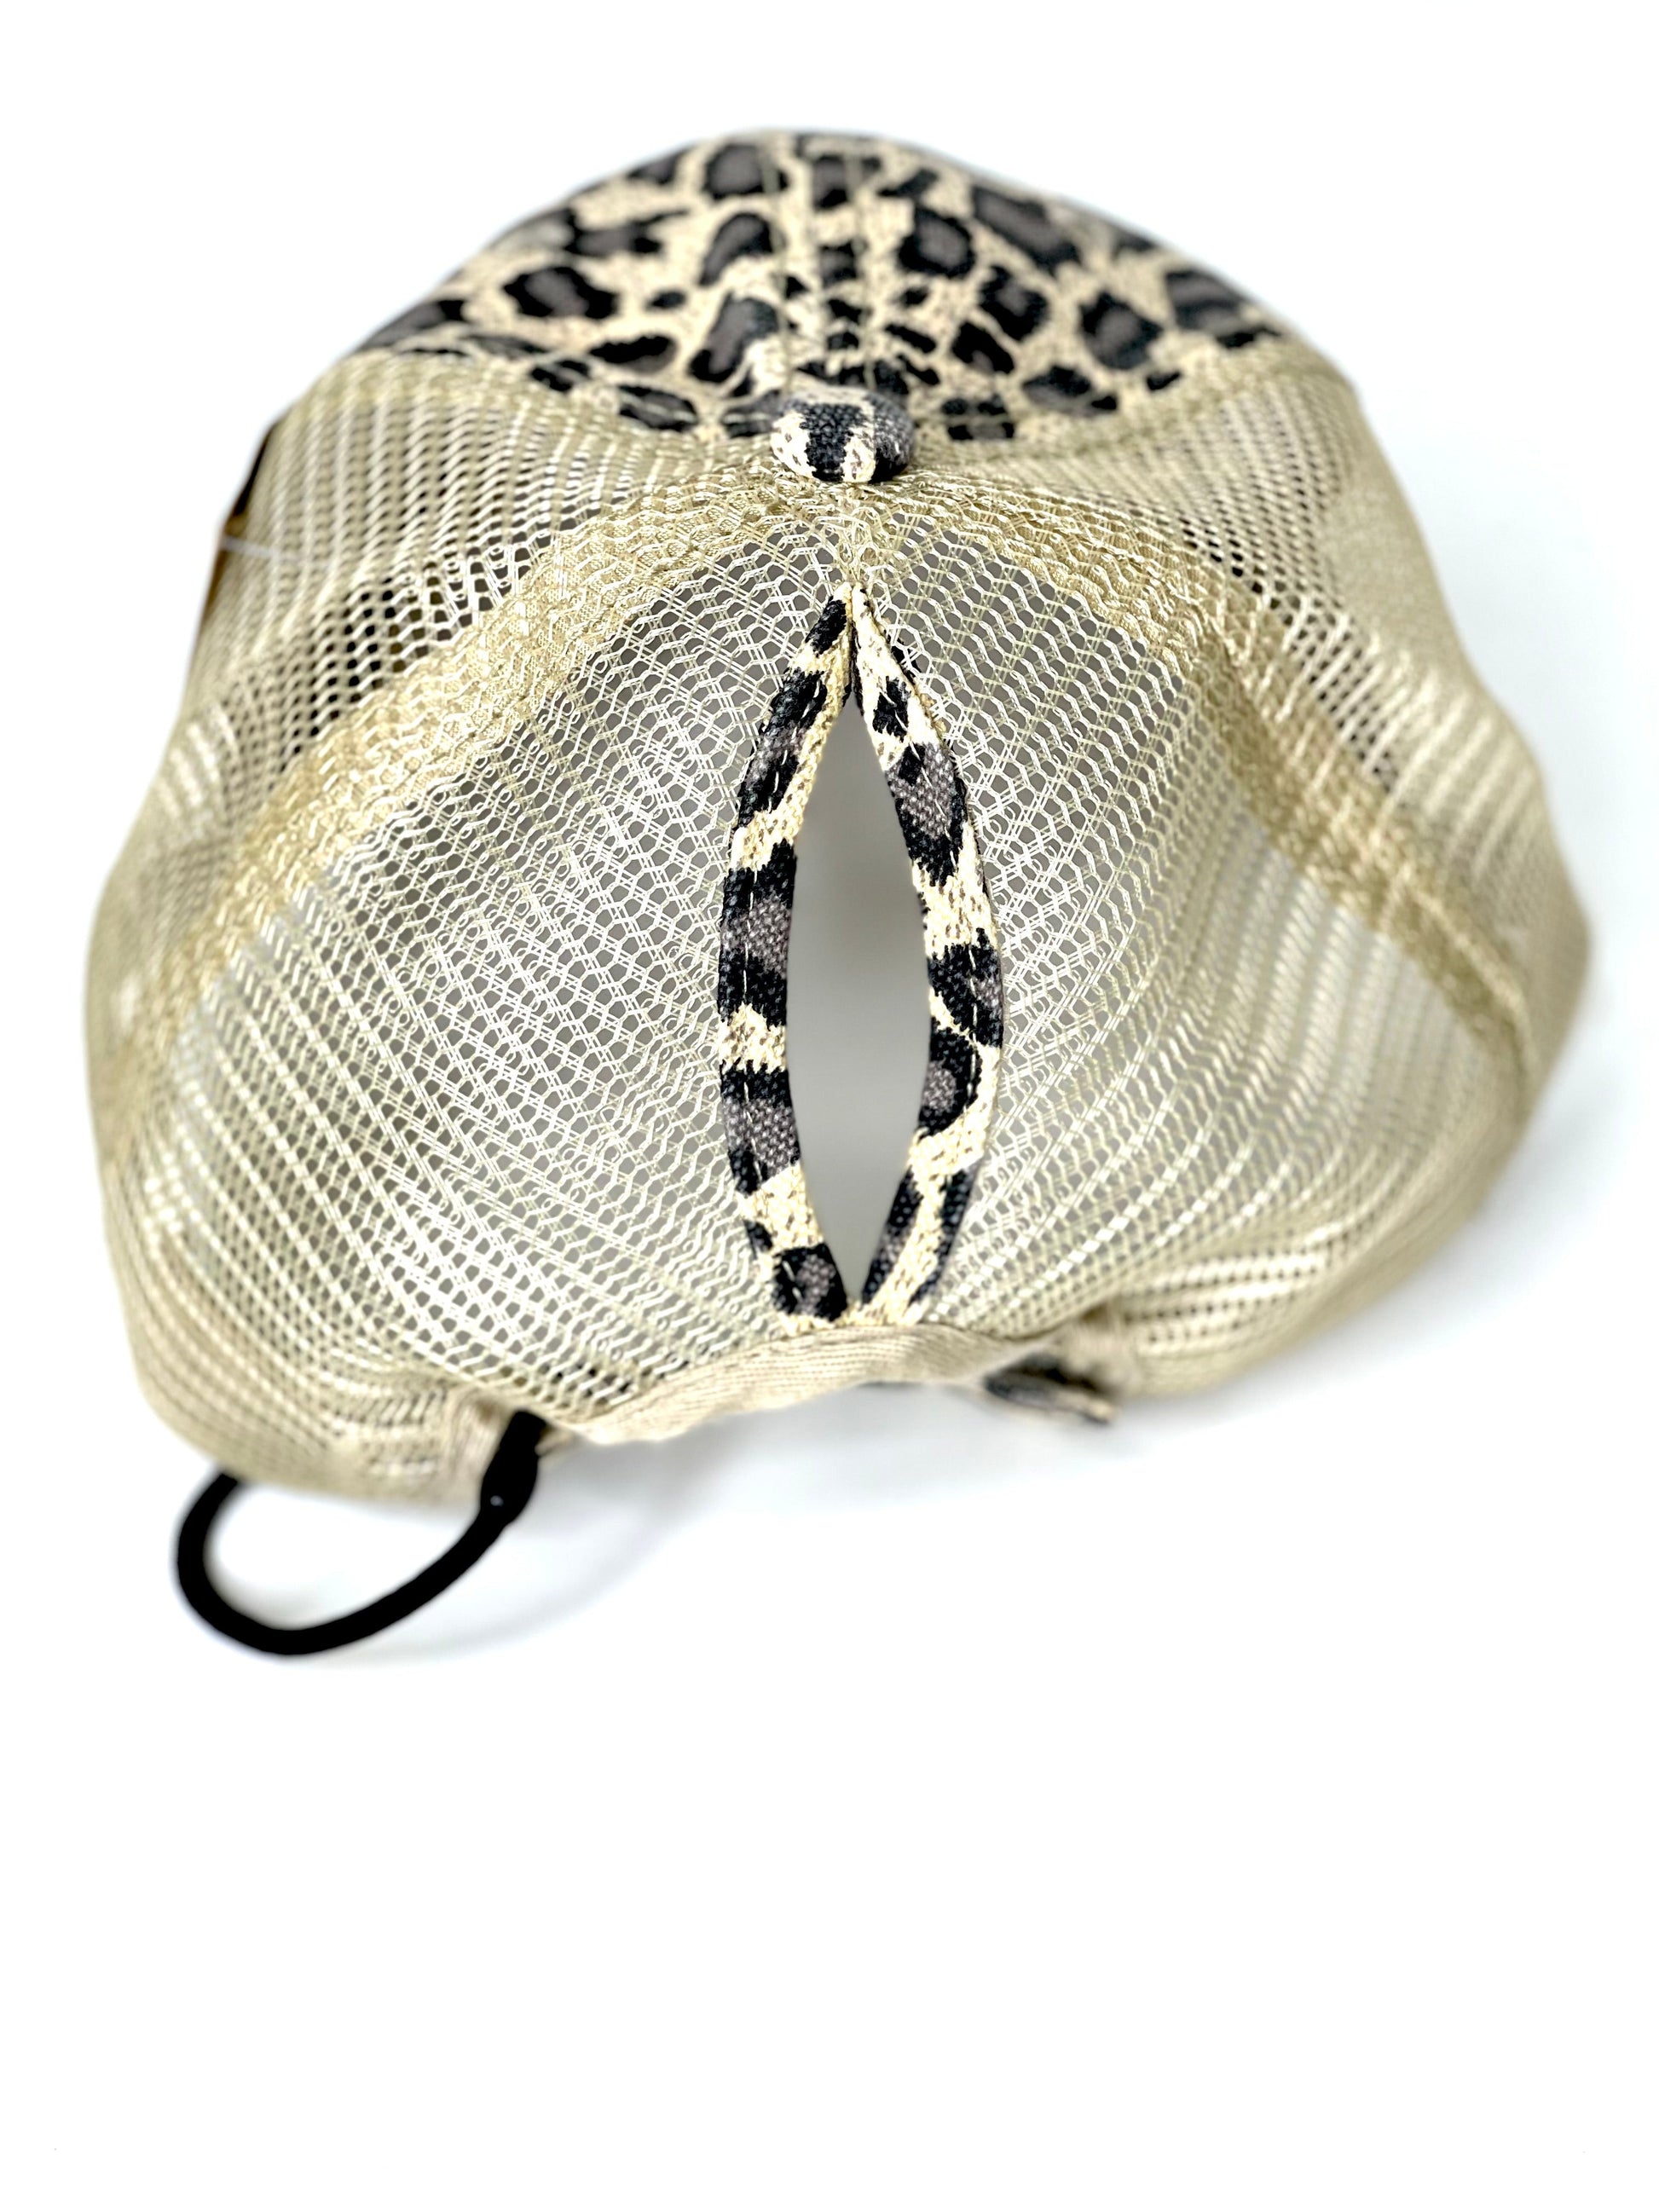 V2 - Kids Cream Leopard Trucker Hat Cream Mesh Black/Gold - Patches Of Upcycling